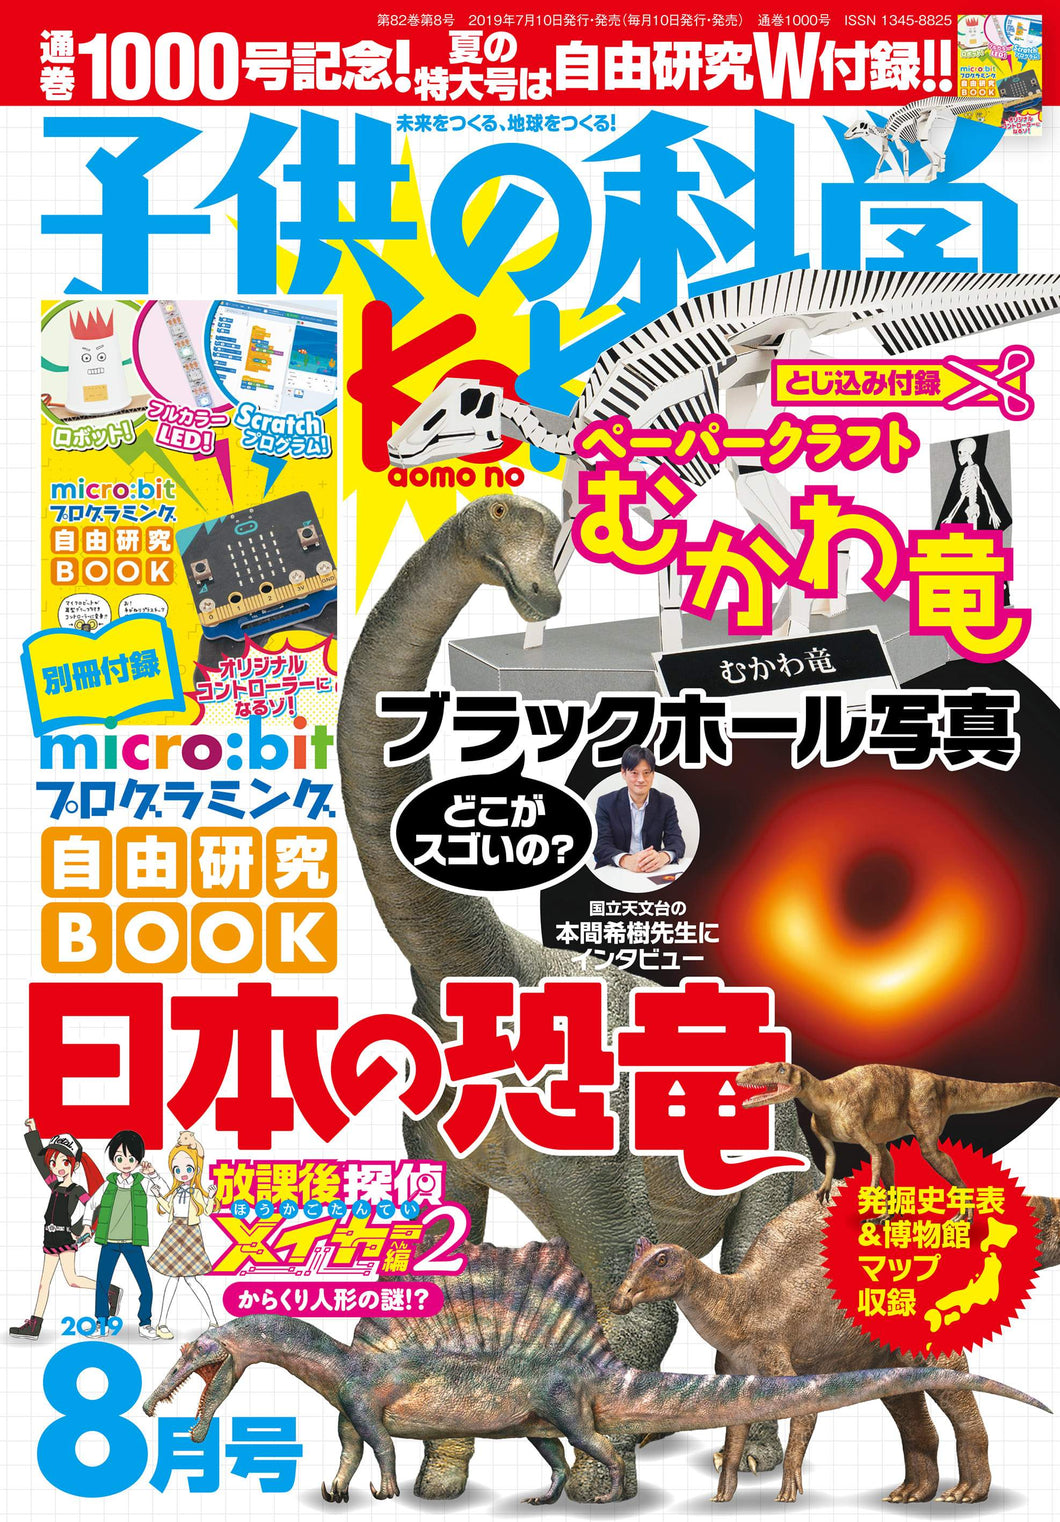 Kodomo no Kagaku August 2019 <extra-large issue> with appendix